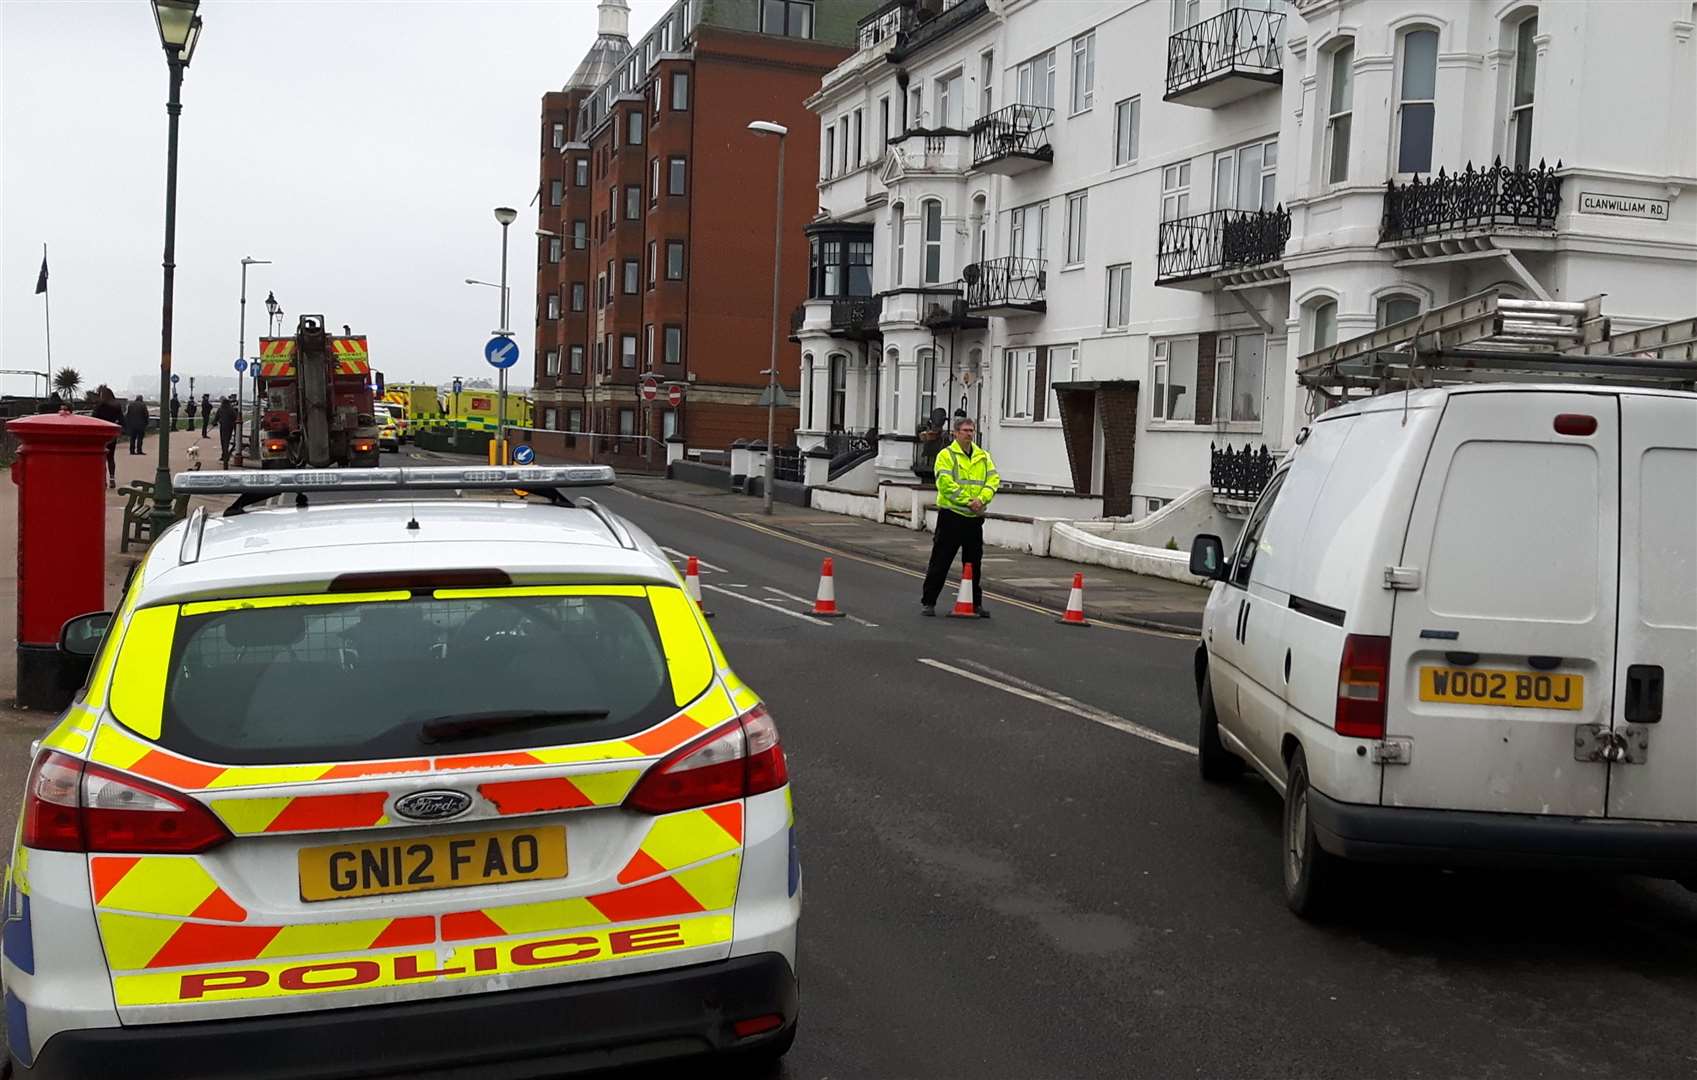 Police closed Prince of Wales Terrace after the incident